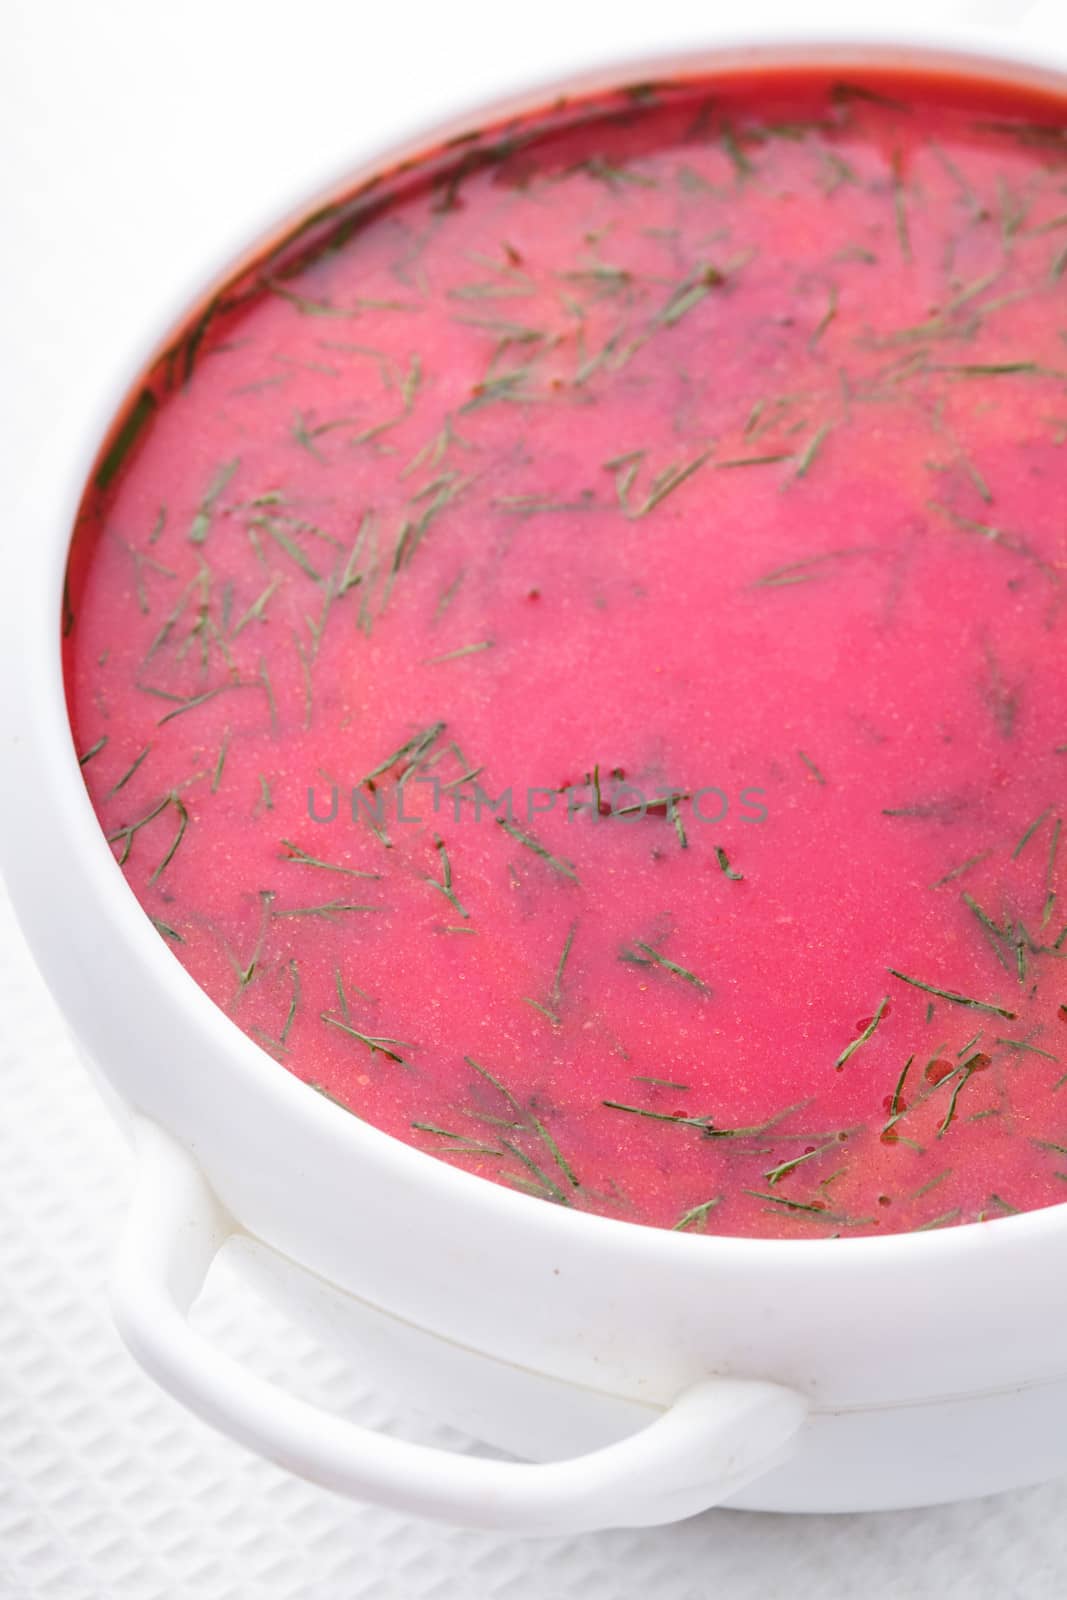 Beetroot soup in the white bowl close up